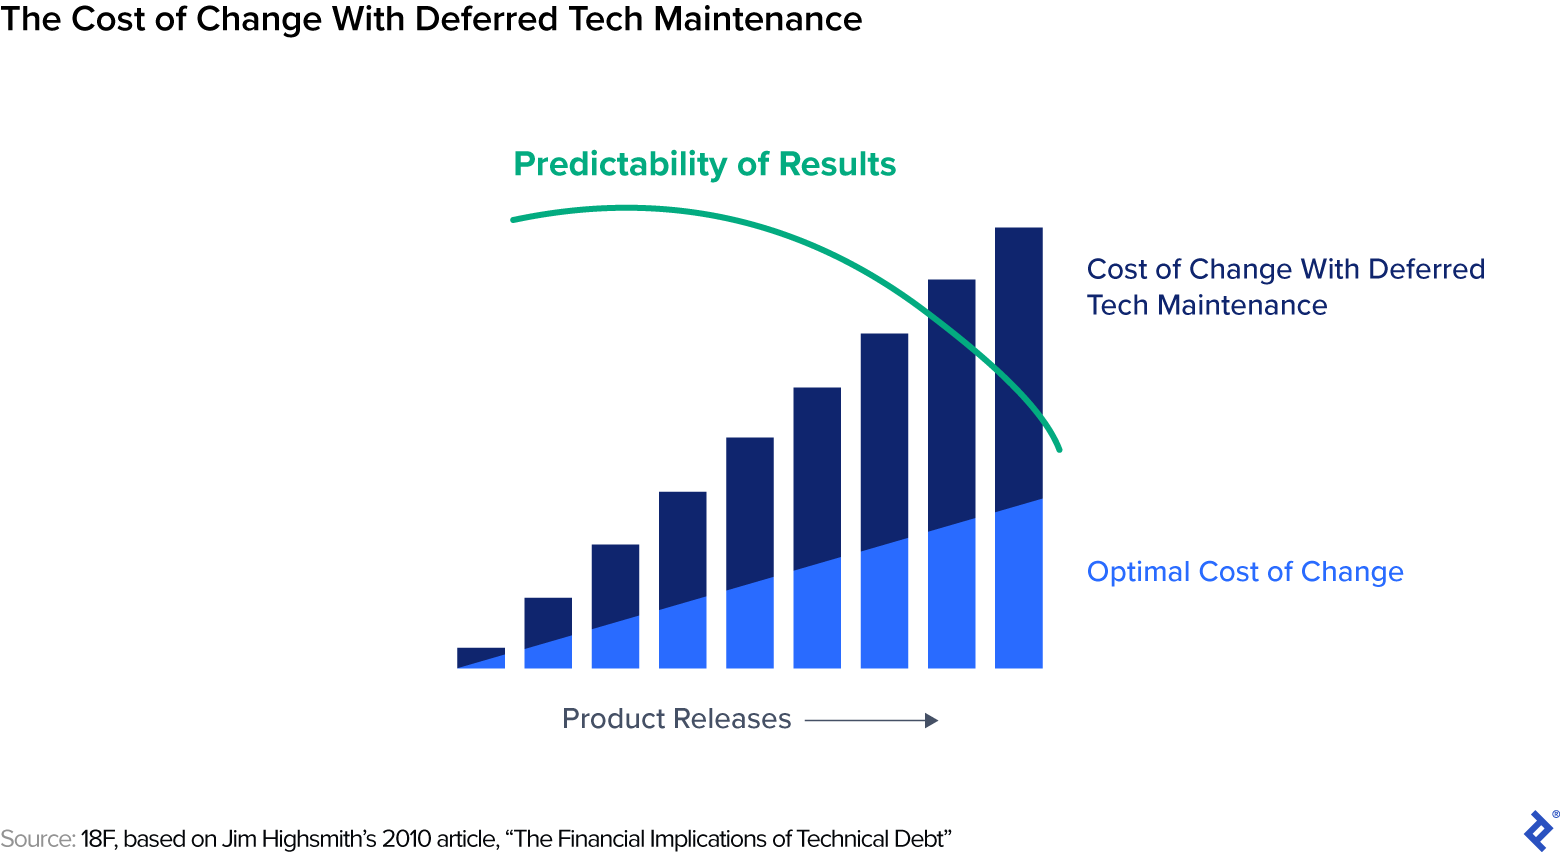 Costs of change increase as tech maintenance is deferred, and the predictability of results falls.